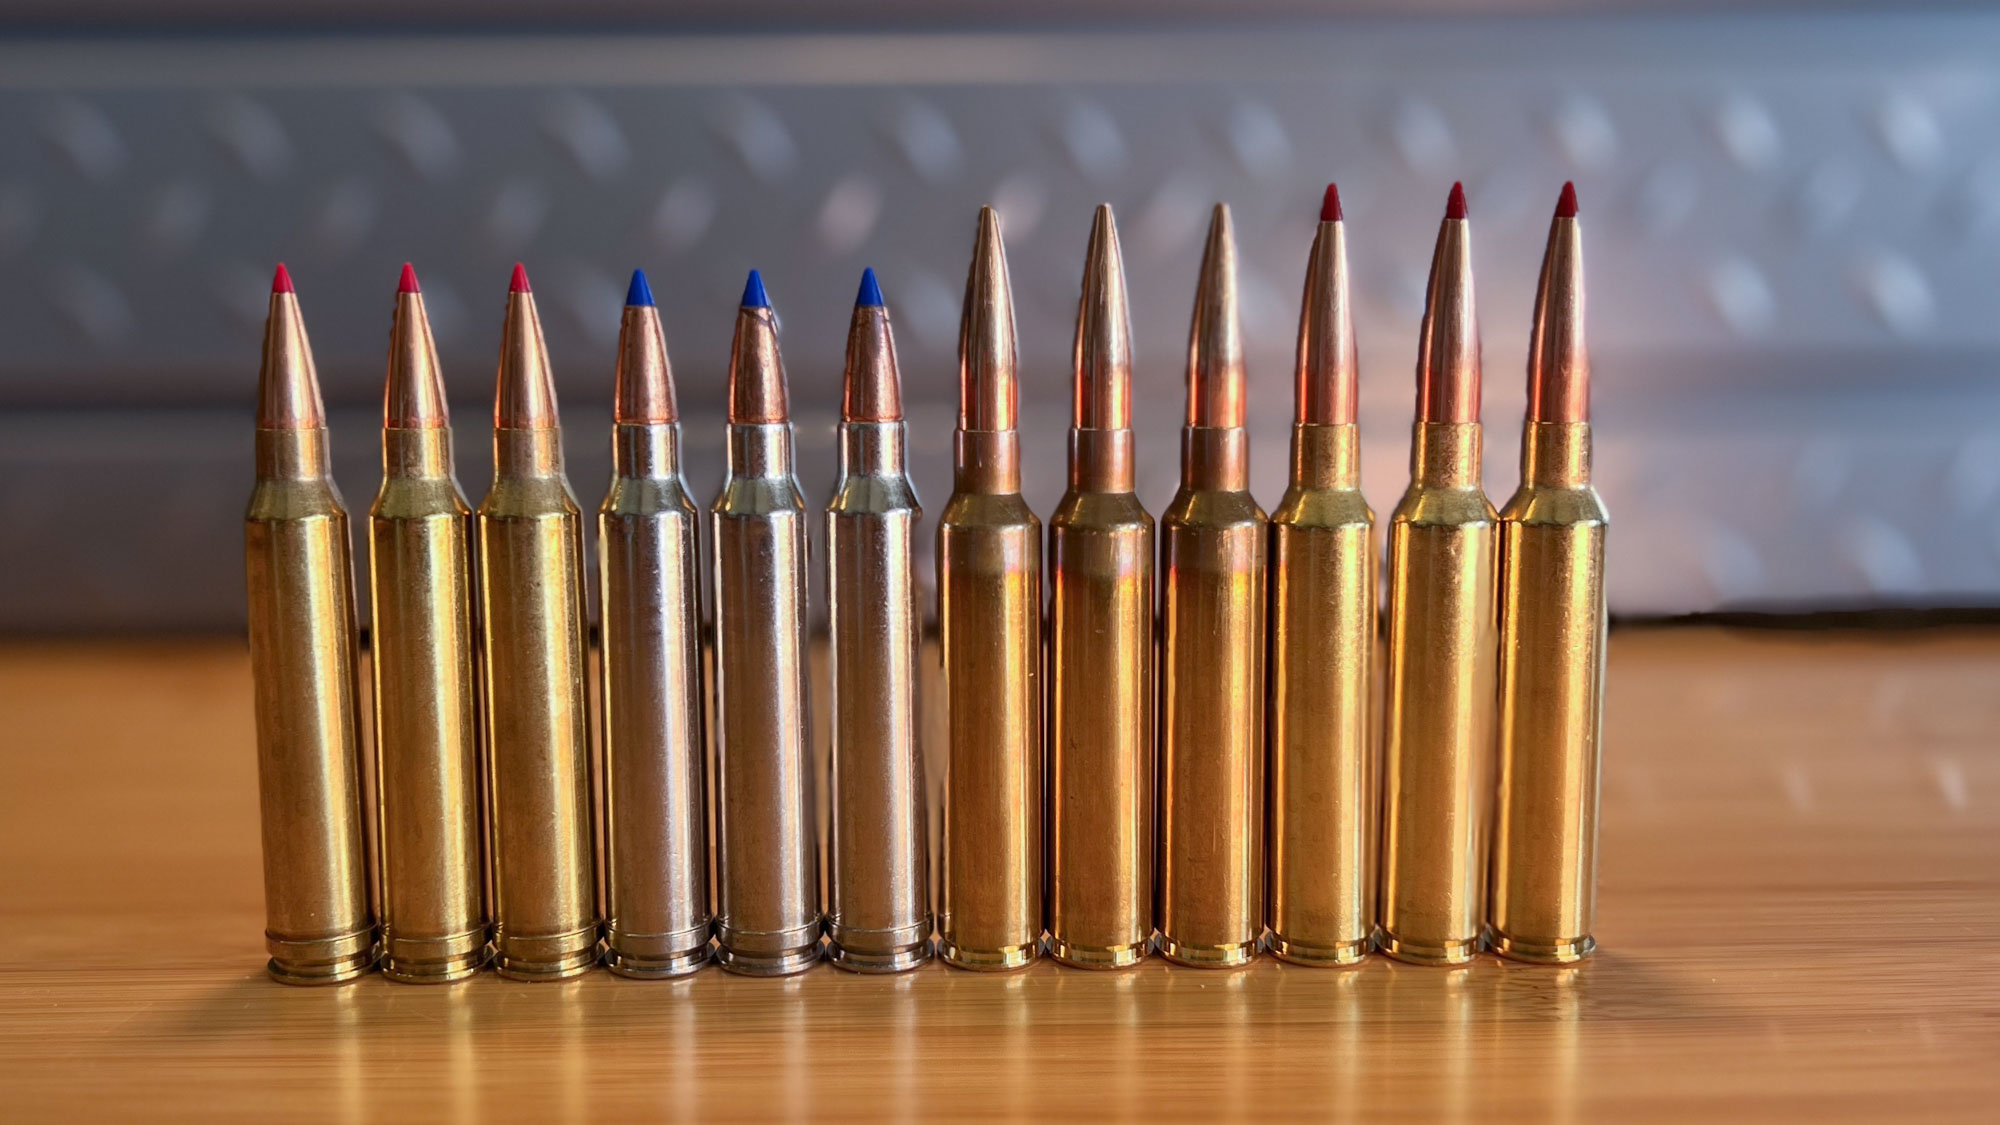 300 PRC vs 300 Win Mag cartridges lined up